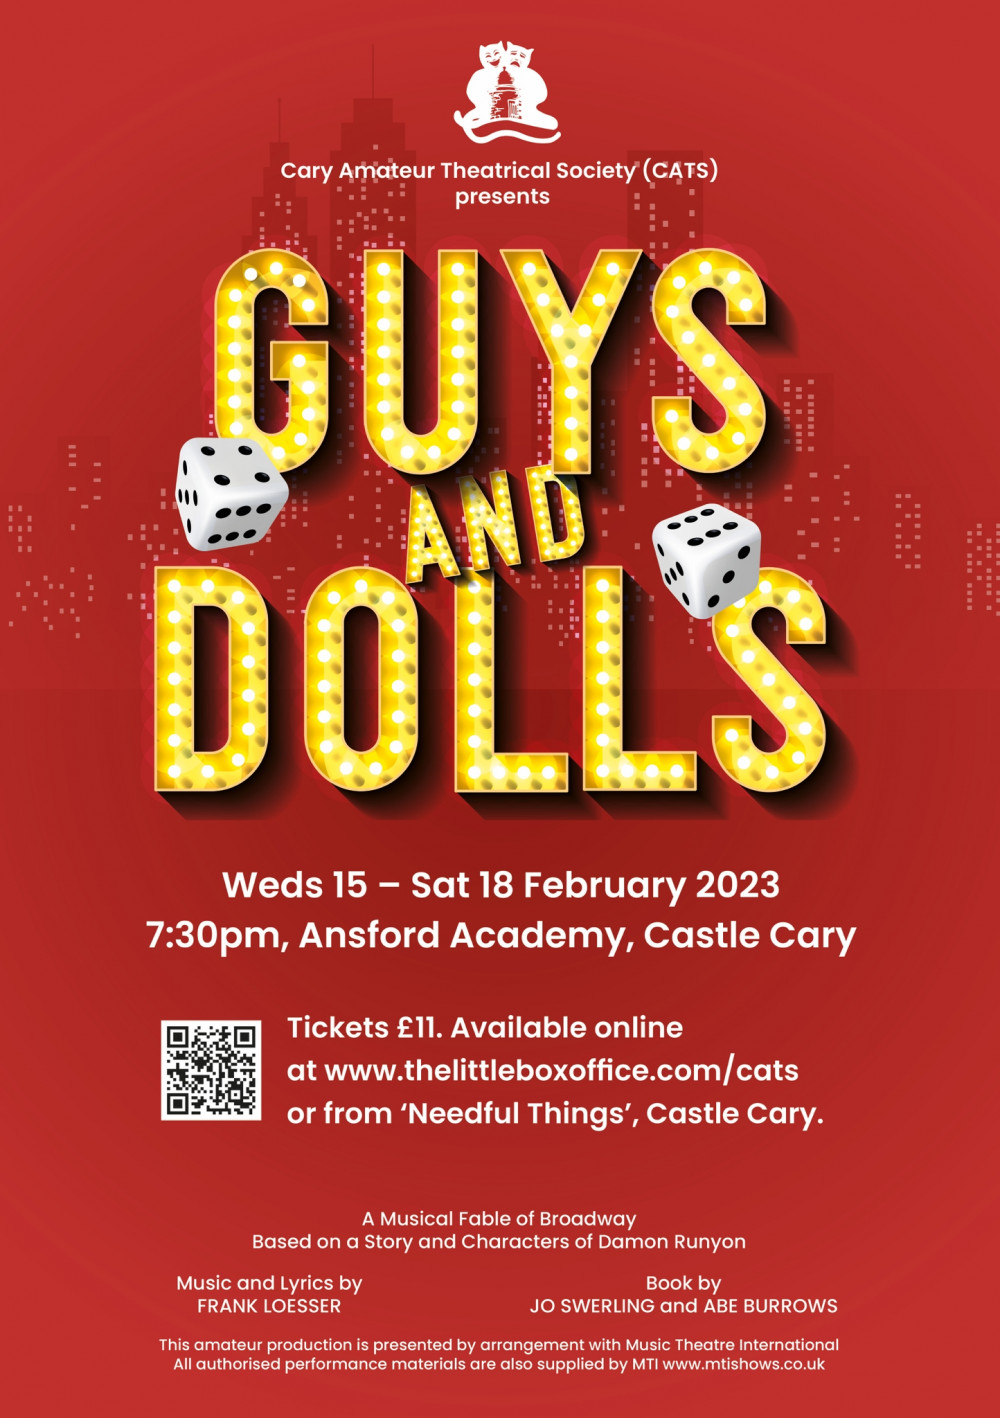 You can see Guys and Dolls at Ansford Academy from the 15th to 18th of February at 7:30pm, so please come along, support us and have a fun evening out! 